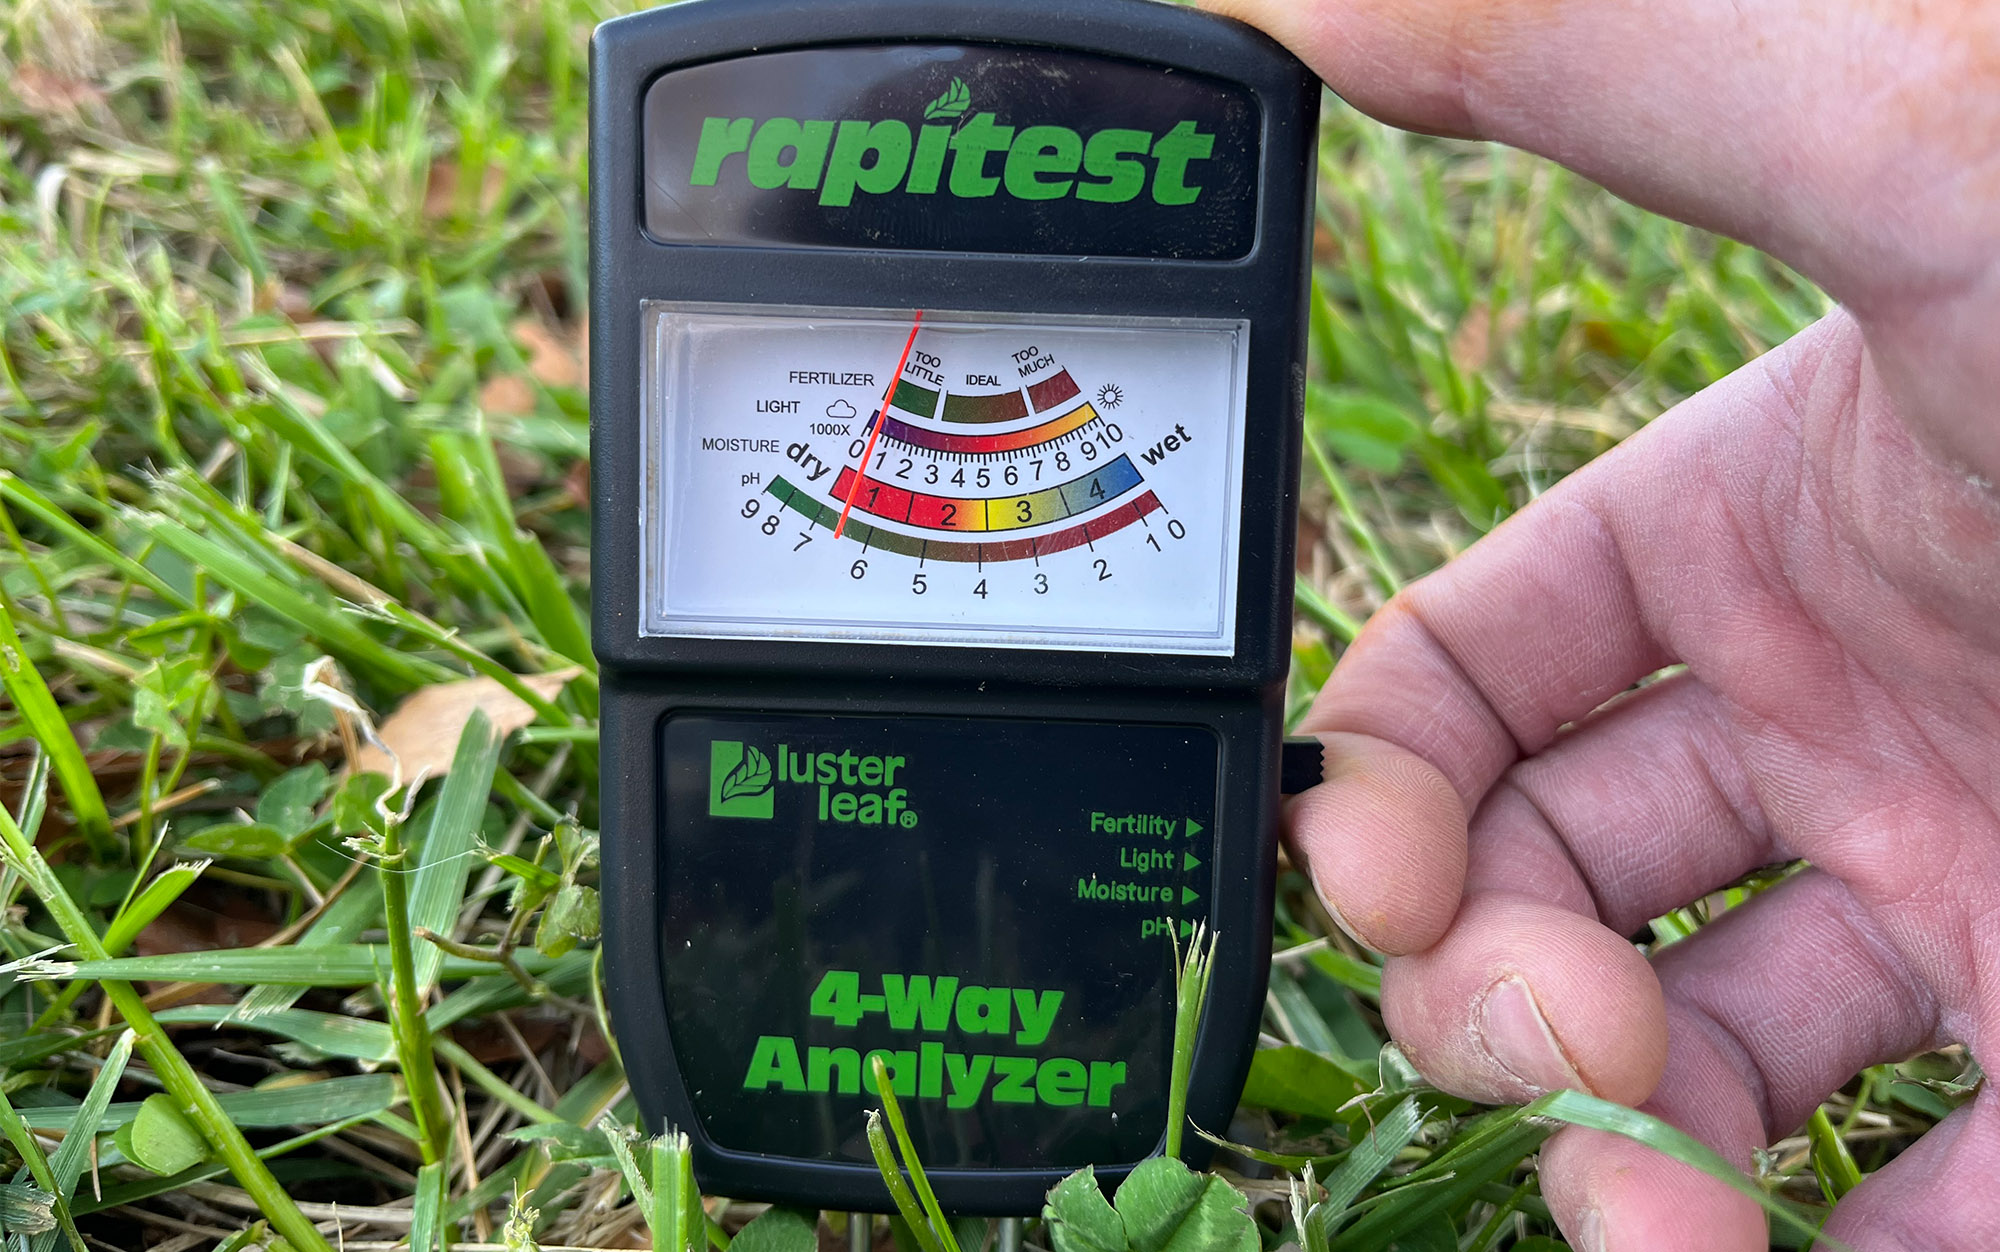 The Luster Leaf RapiTest 4-Way Analyzer doesn't need batteries.